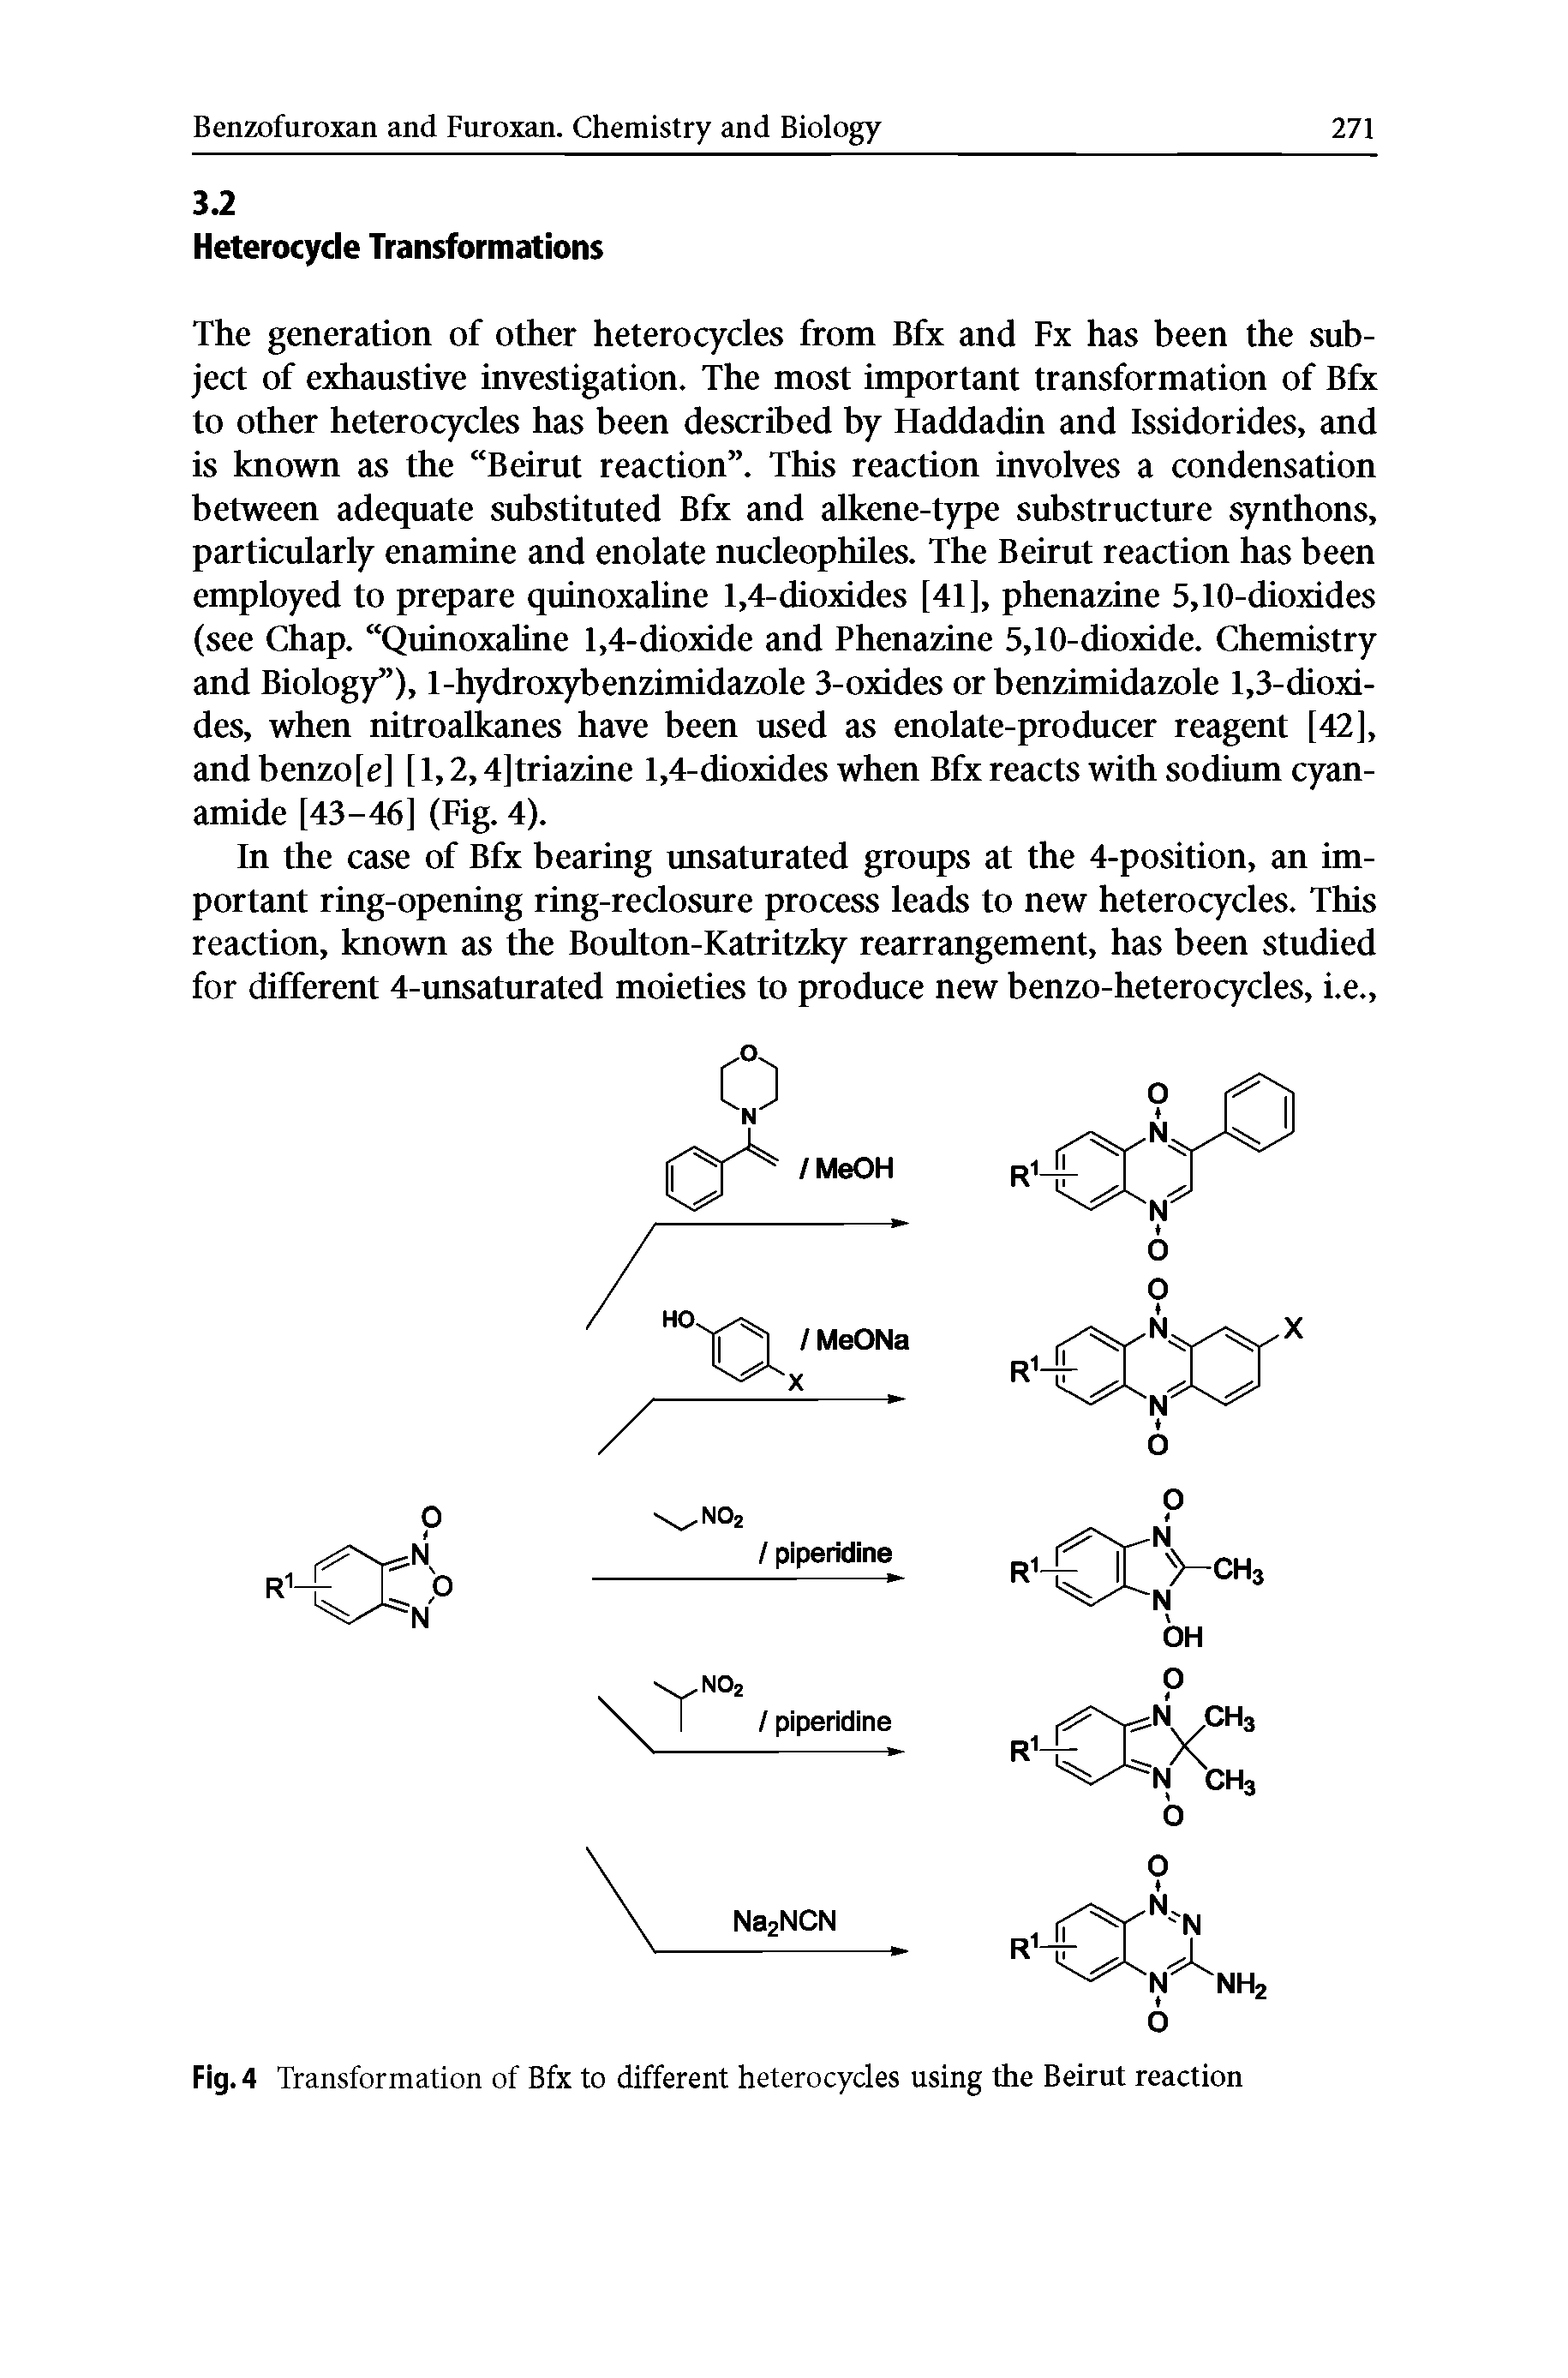 Fig. 4 Transformation of Bfx to different heterocycles using the Beirut reaction...